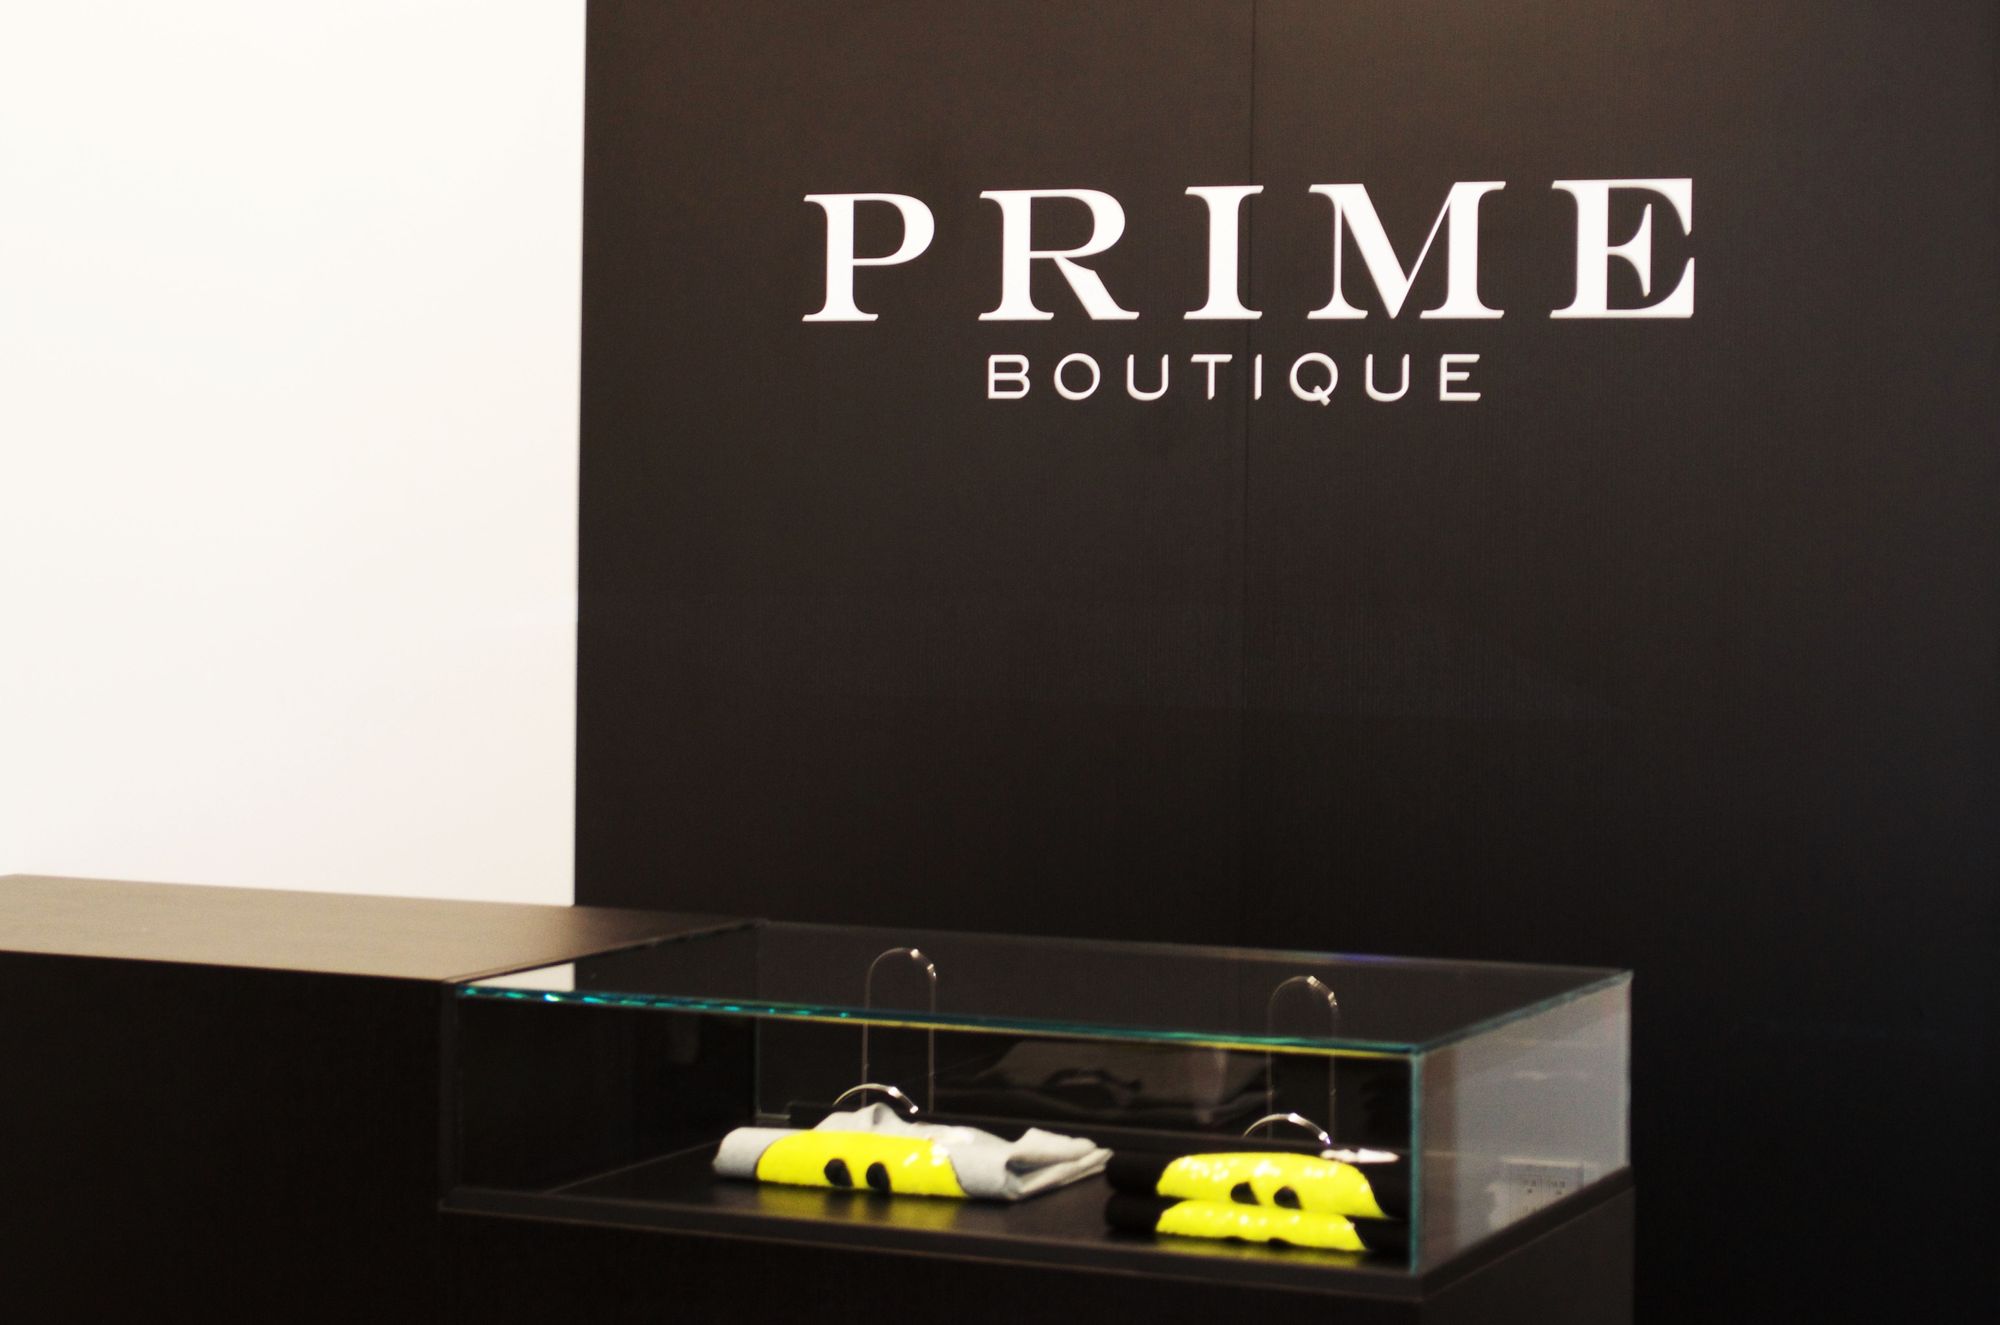 Prime Boutique: Fashionable Attire For Every Woman (Sponsored)